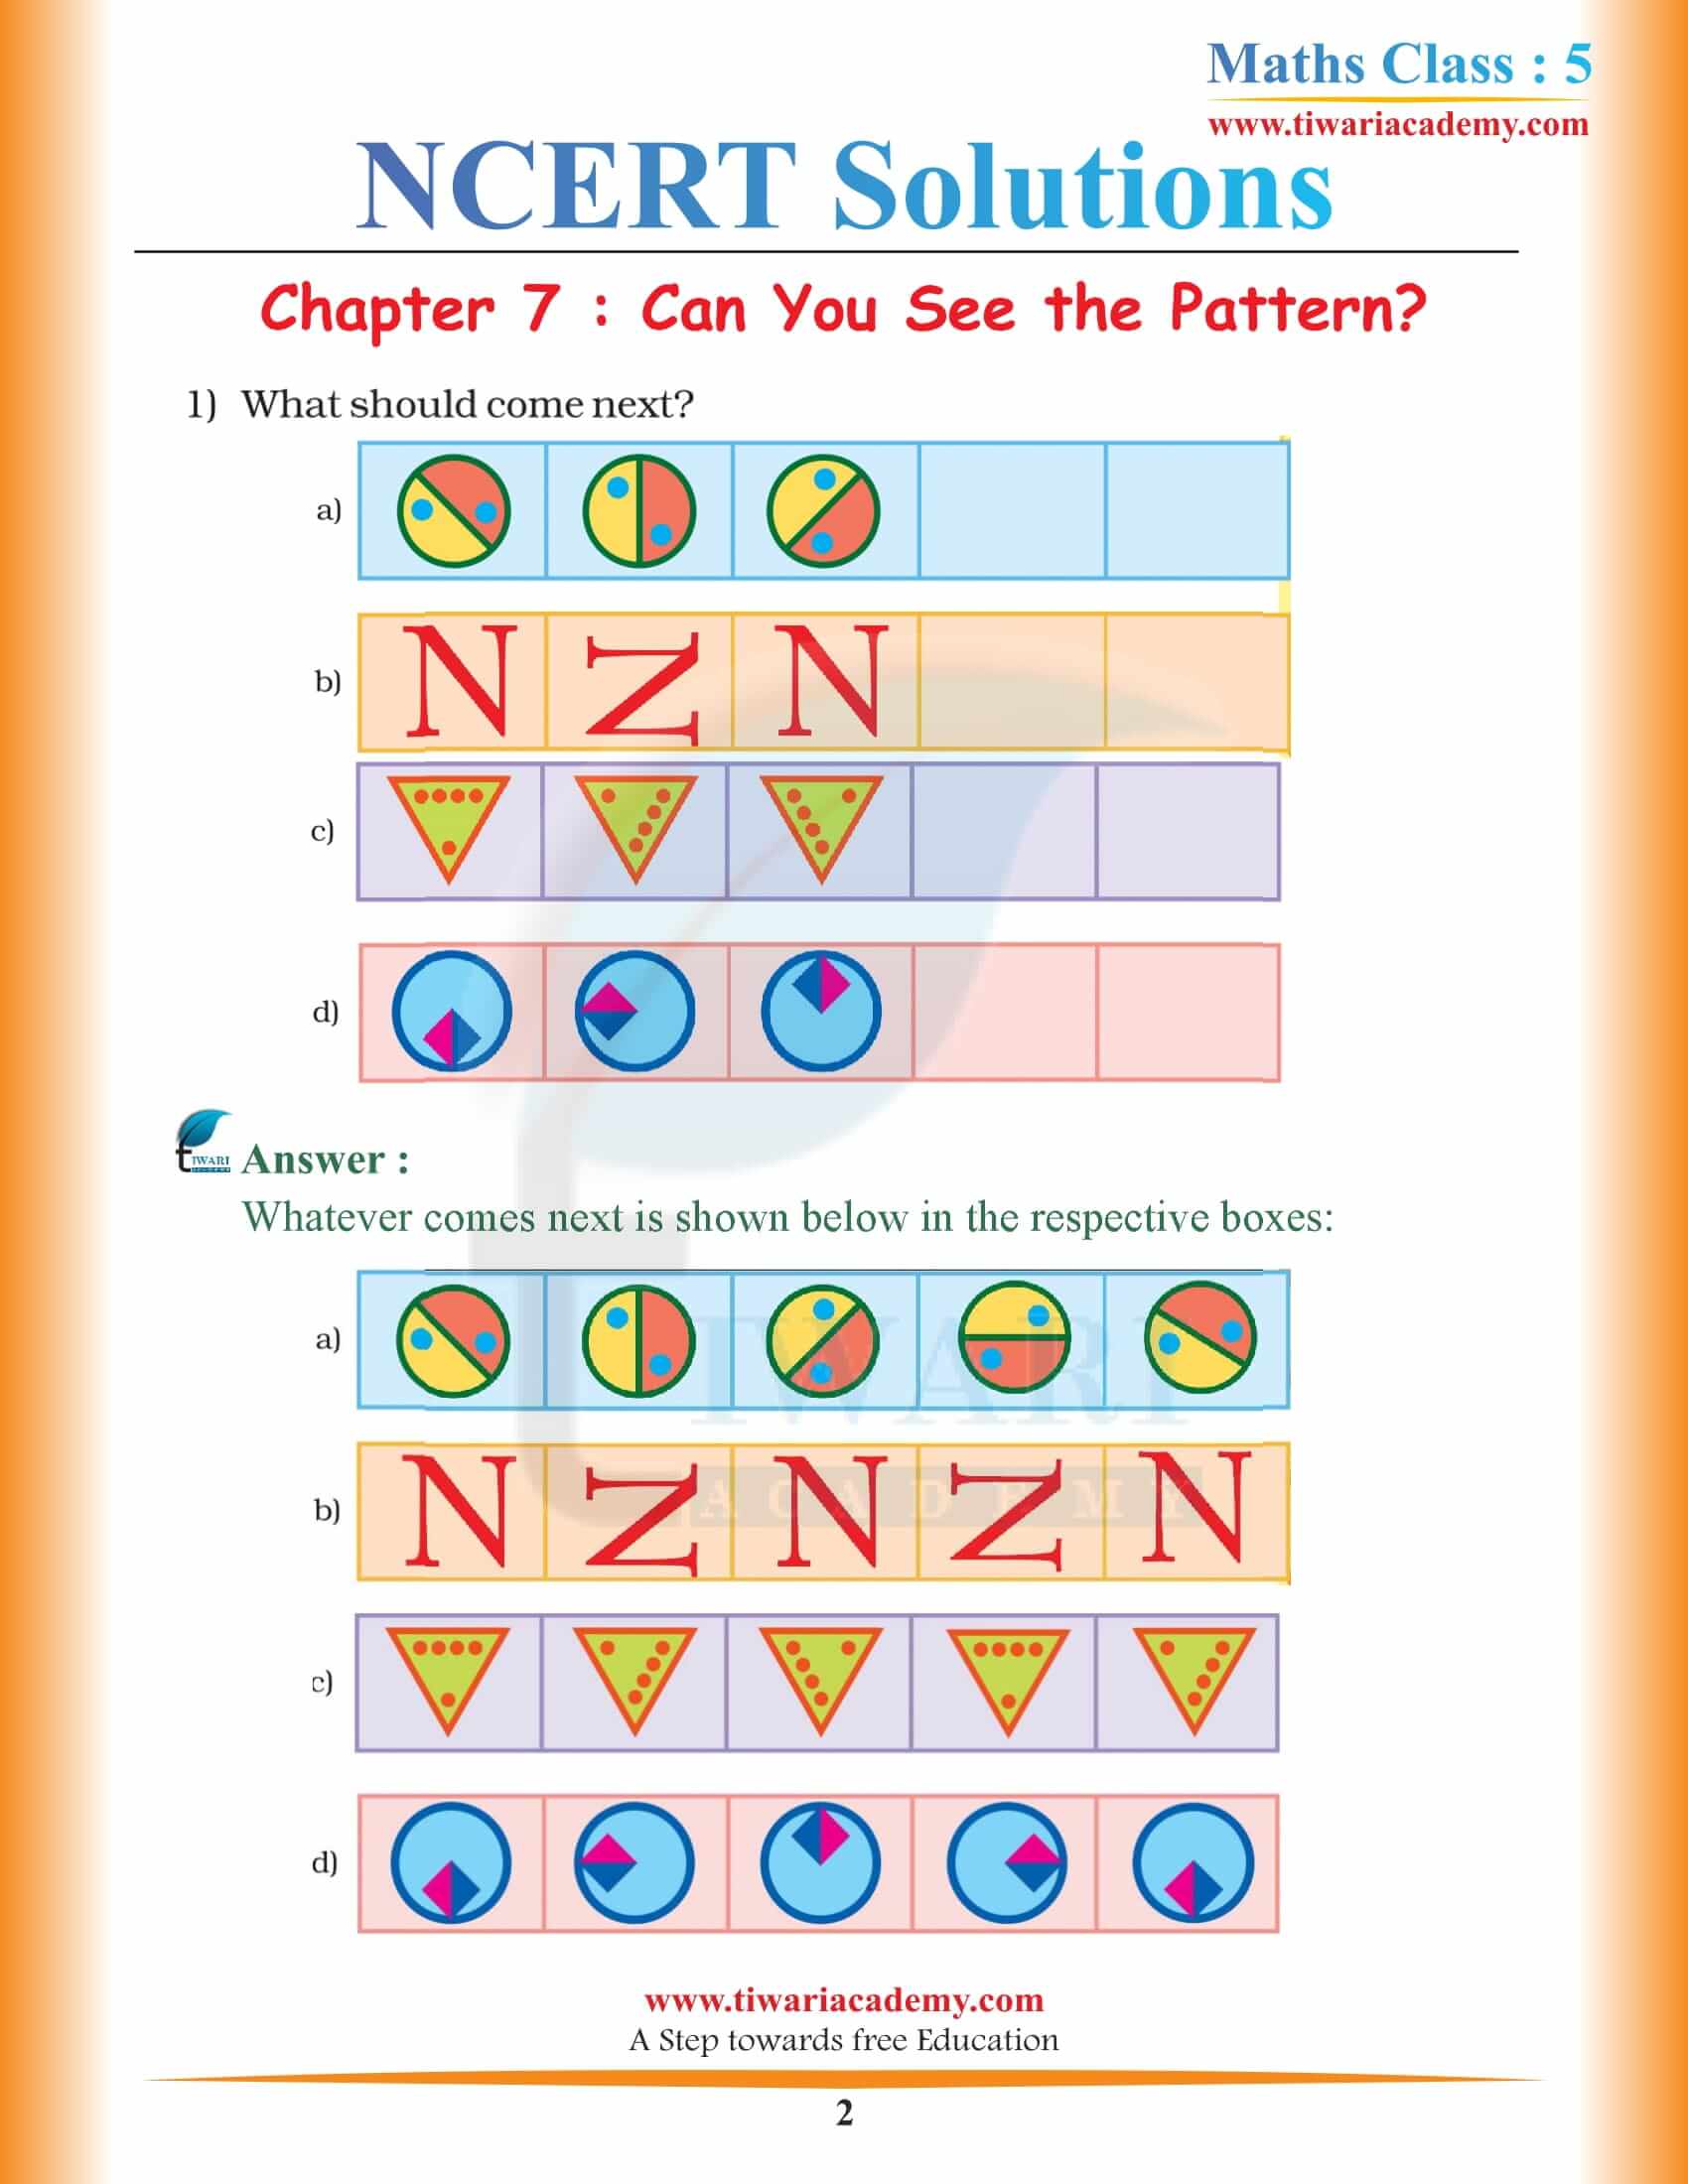 NCERT Solutions for Class 5 Maths Chapter 7 in PDF